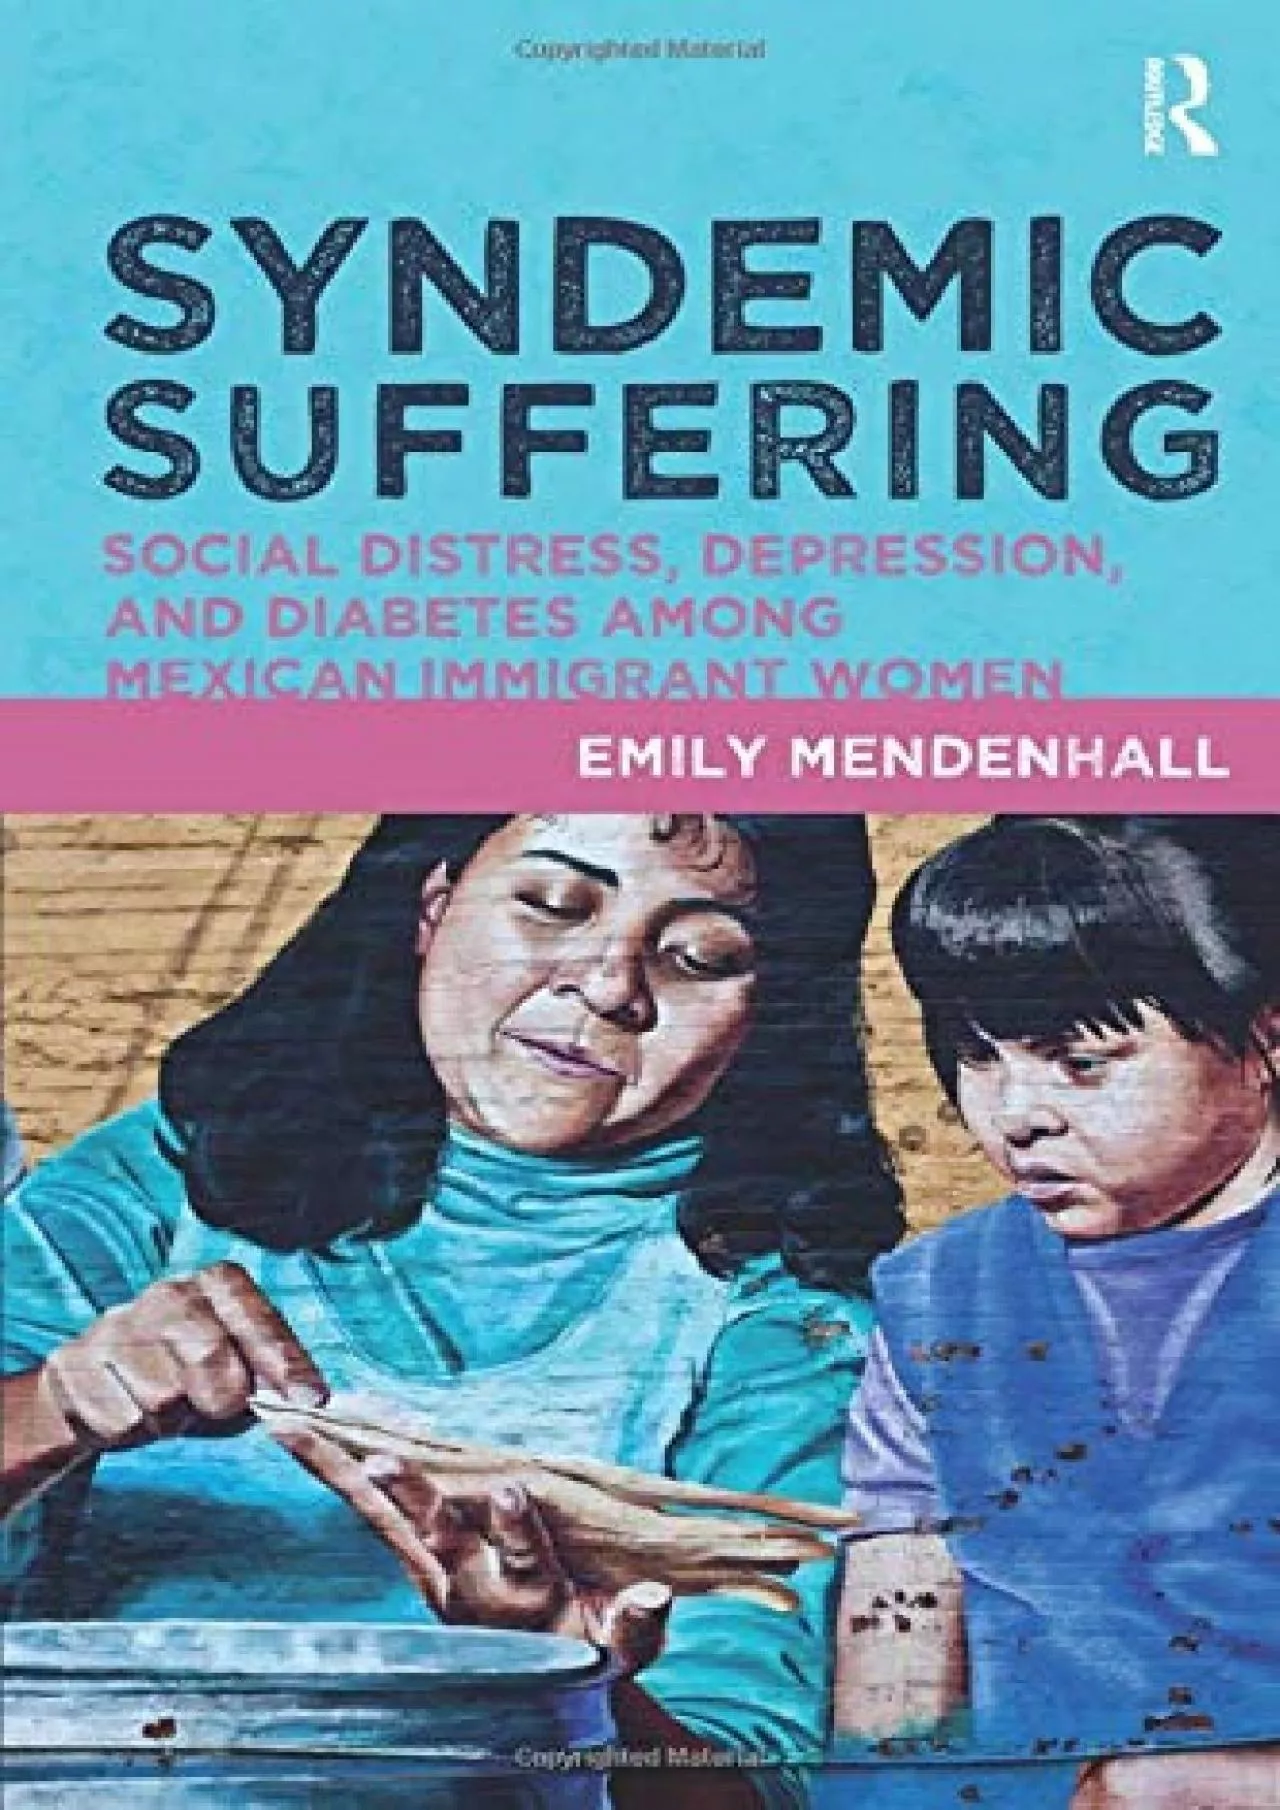 [DOWNLOAD]-Syndemic Suffering: Social Distress, Depression, and Diabetes among Mexican